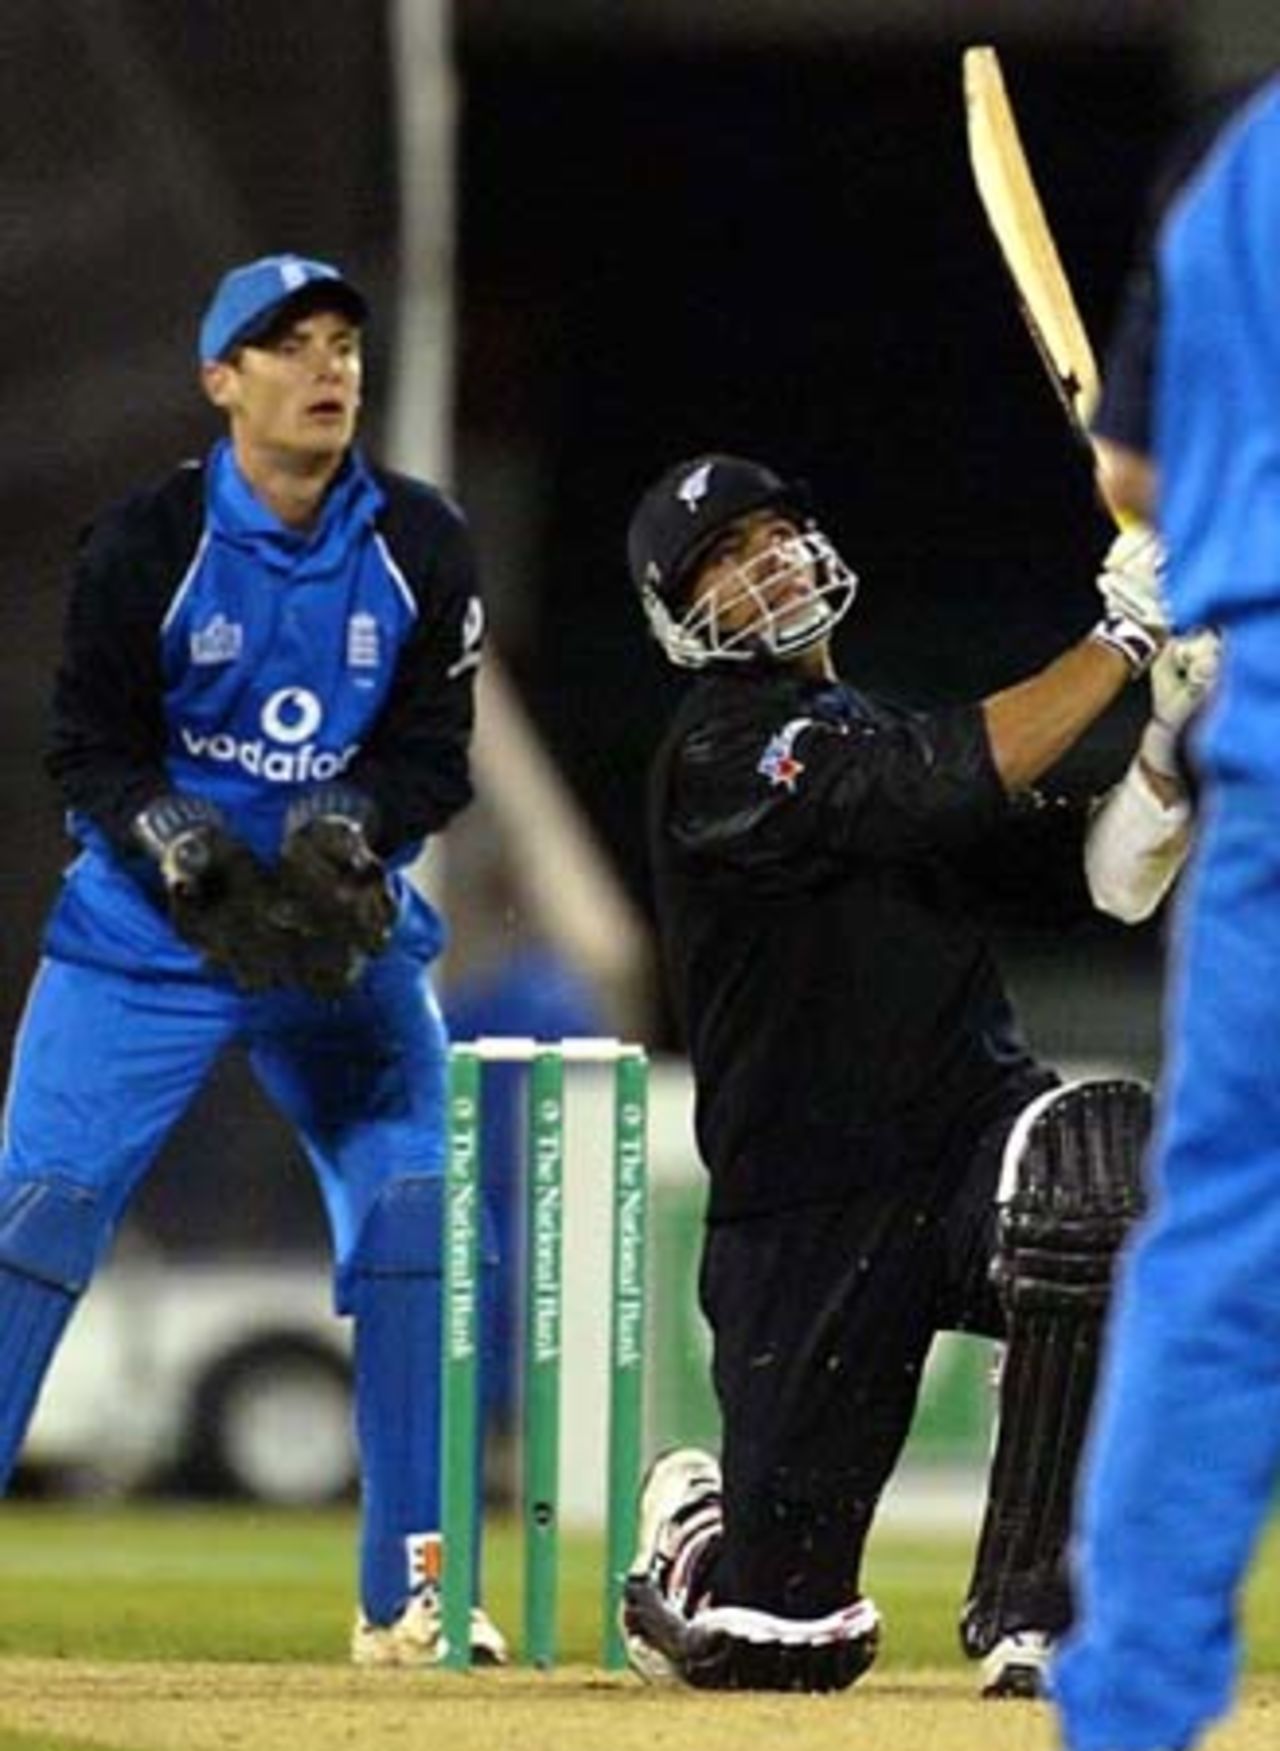 New Zealand batsman Andre Adams hits a six from England bowler Ashley Giles during his innings of 28 not out. Wicket-keeper James Foster looks on. 1st ODI: New Zealand v England at Jade Stadium, Christchurch, 13 February 2002.